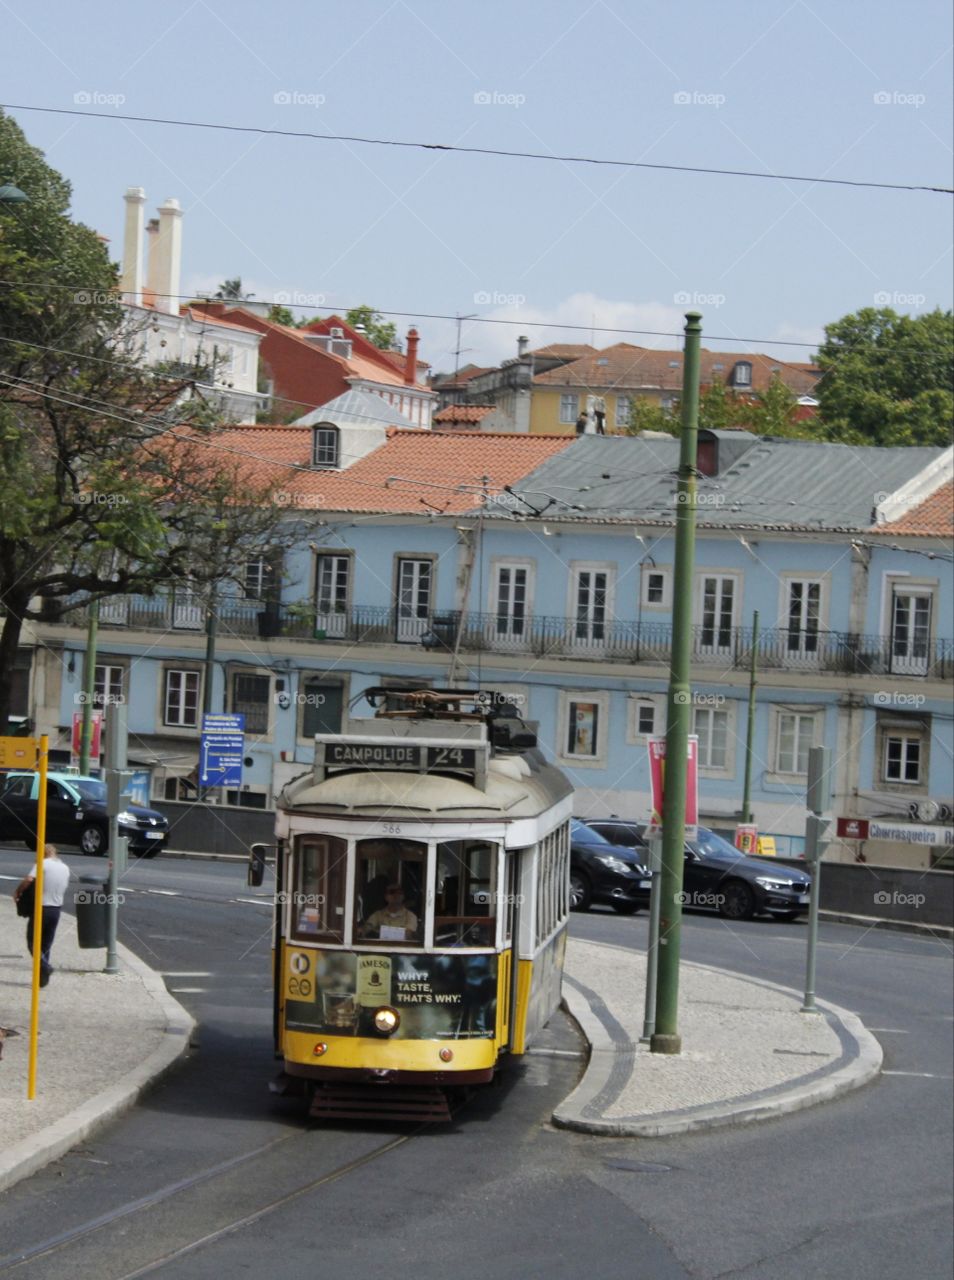 The famous oldest trams in Portugal are still very beautiful!